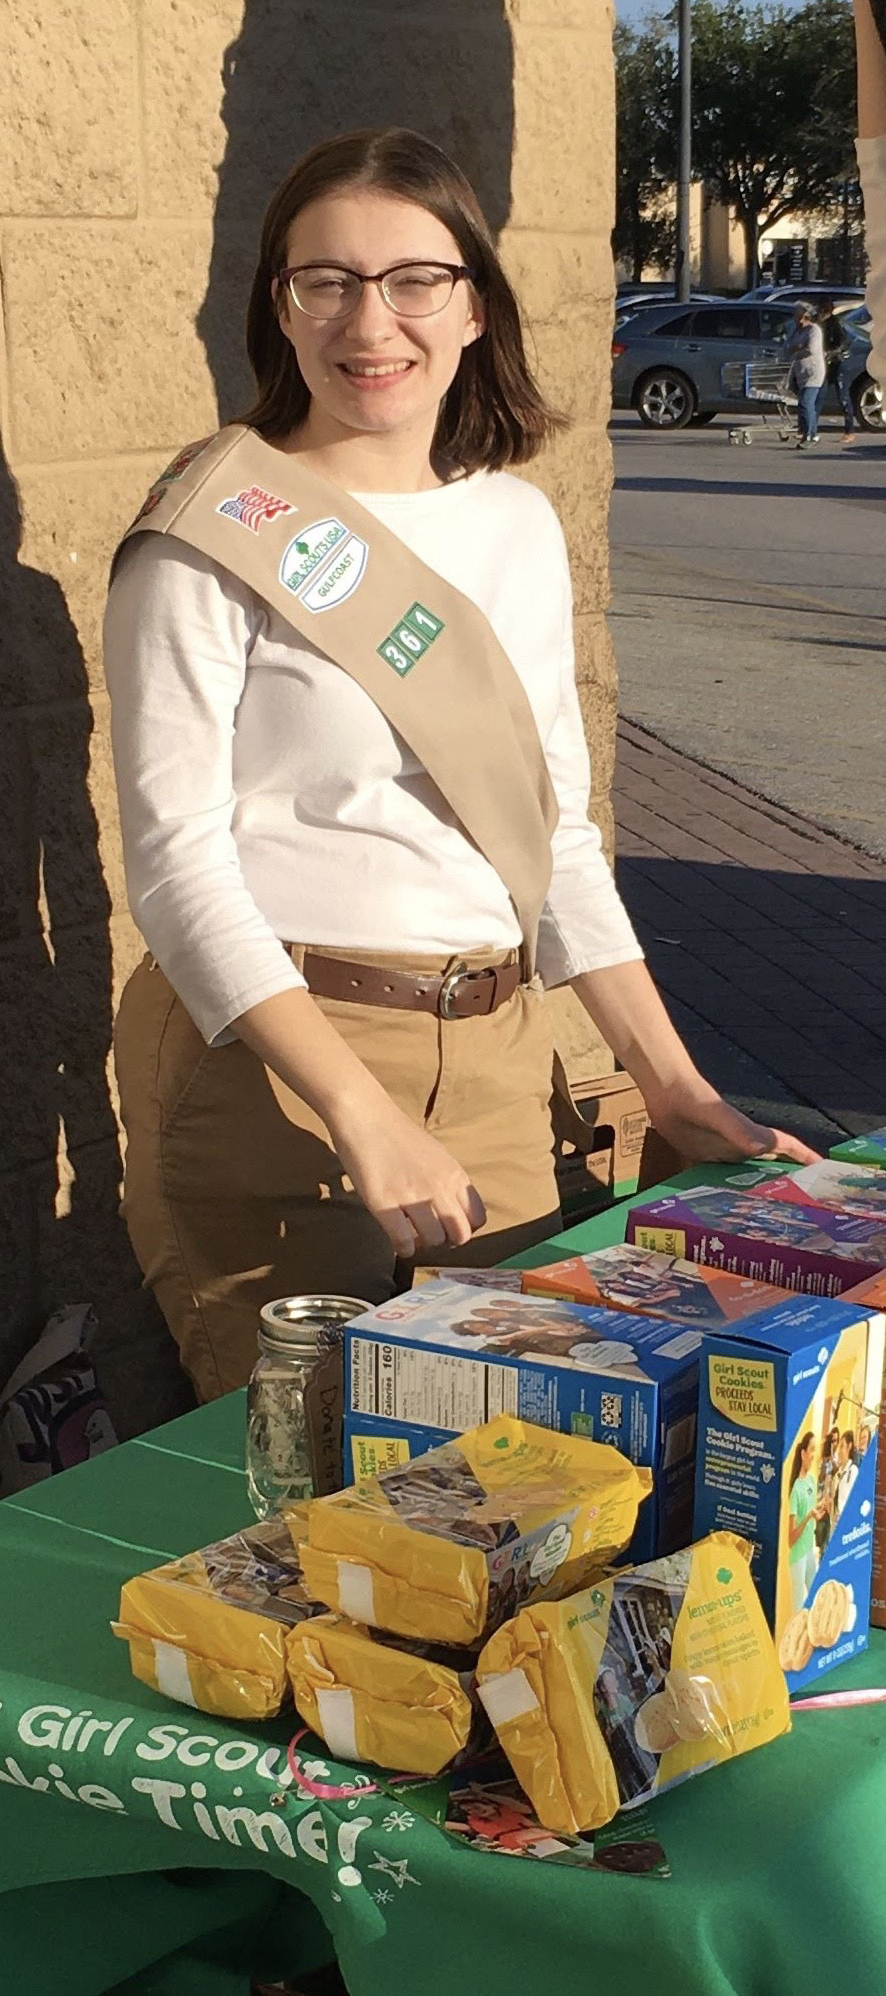 Leah Lurie will miss selling Girl Scout cookies and being a part of a troop. Her favorite cookie was the Lemonade cookies. Courtesy photo.